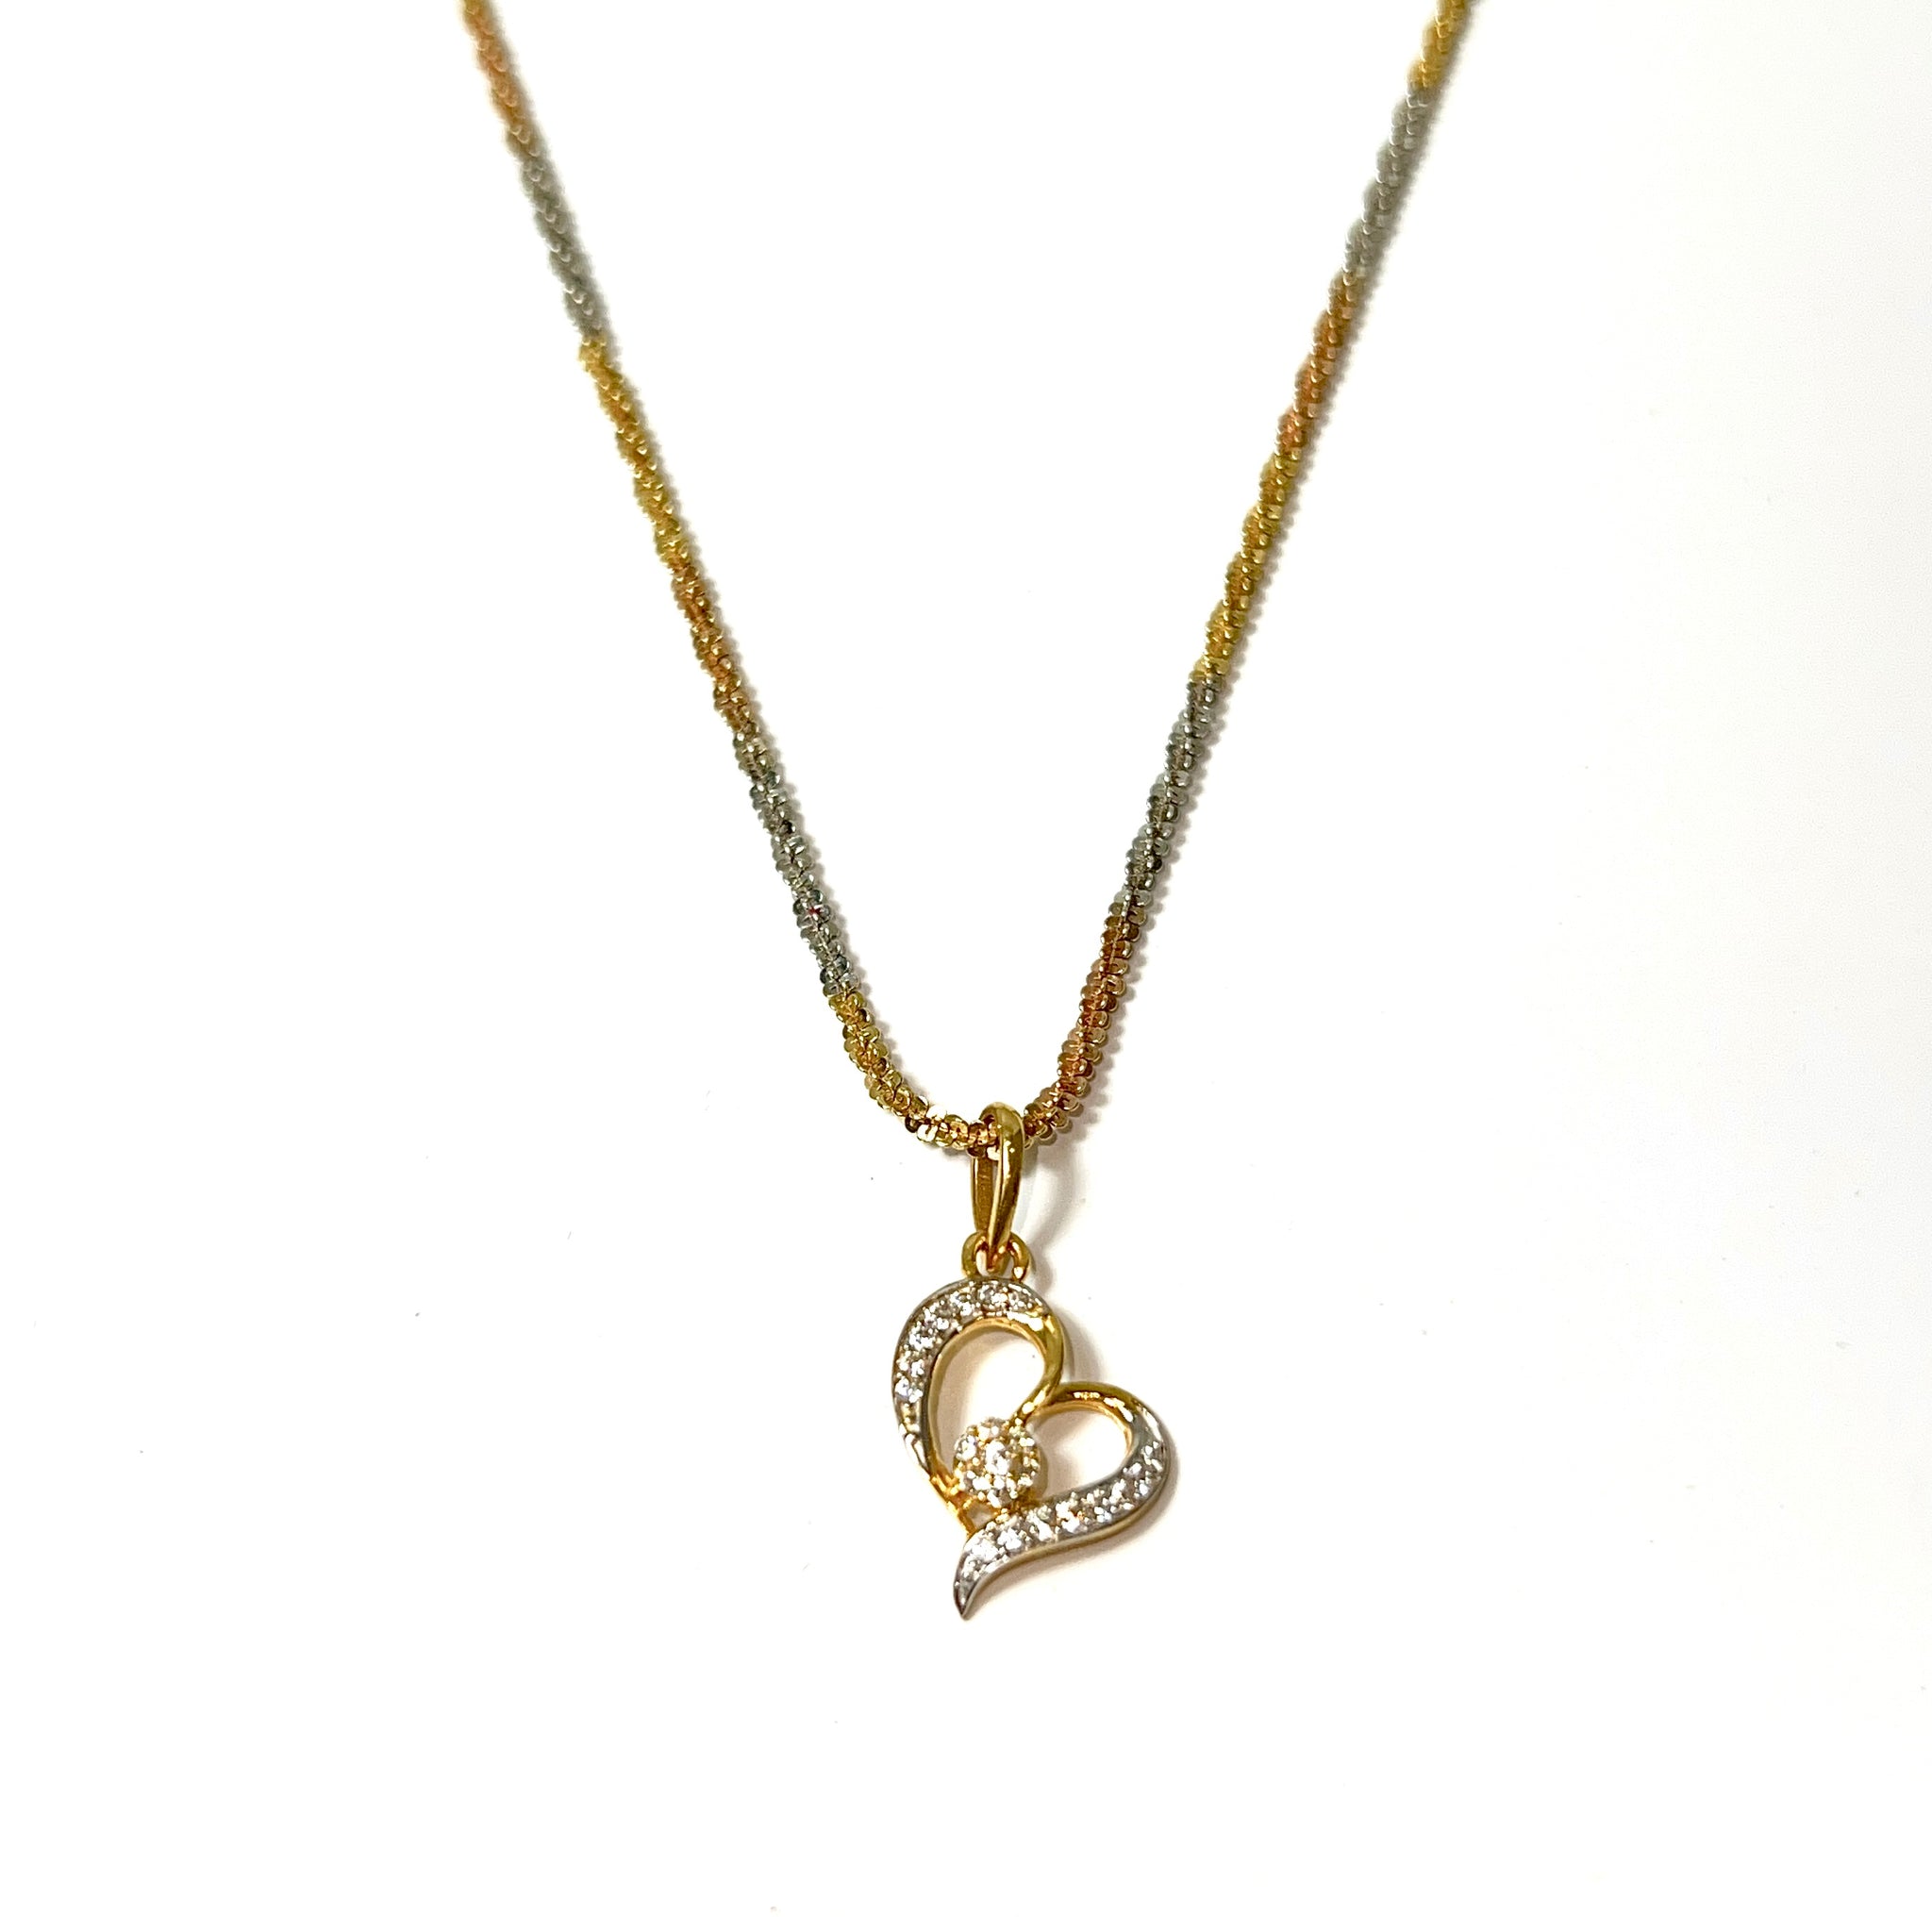 Hart pendant with Tricolor Neckless - 18 Carat Gold - 58cm / 2mm - 422